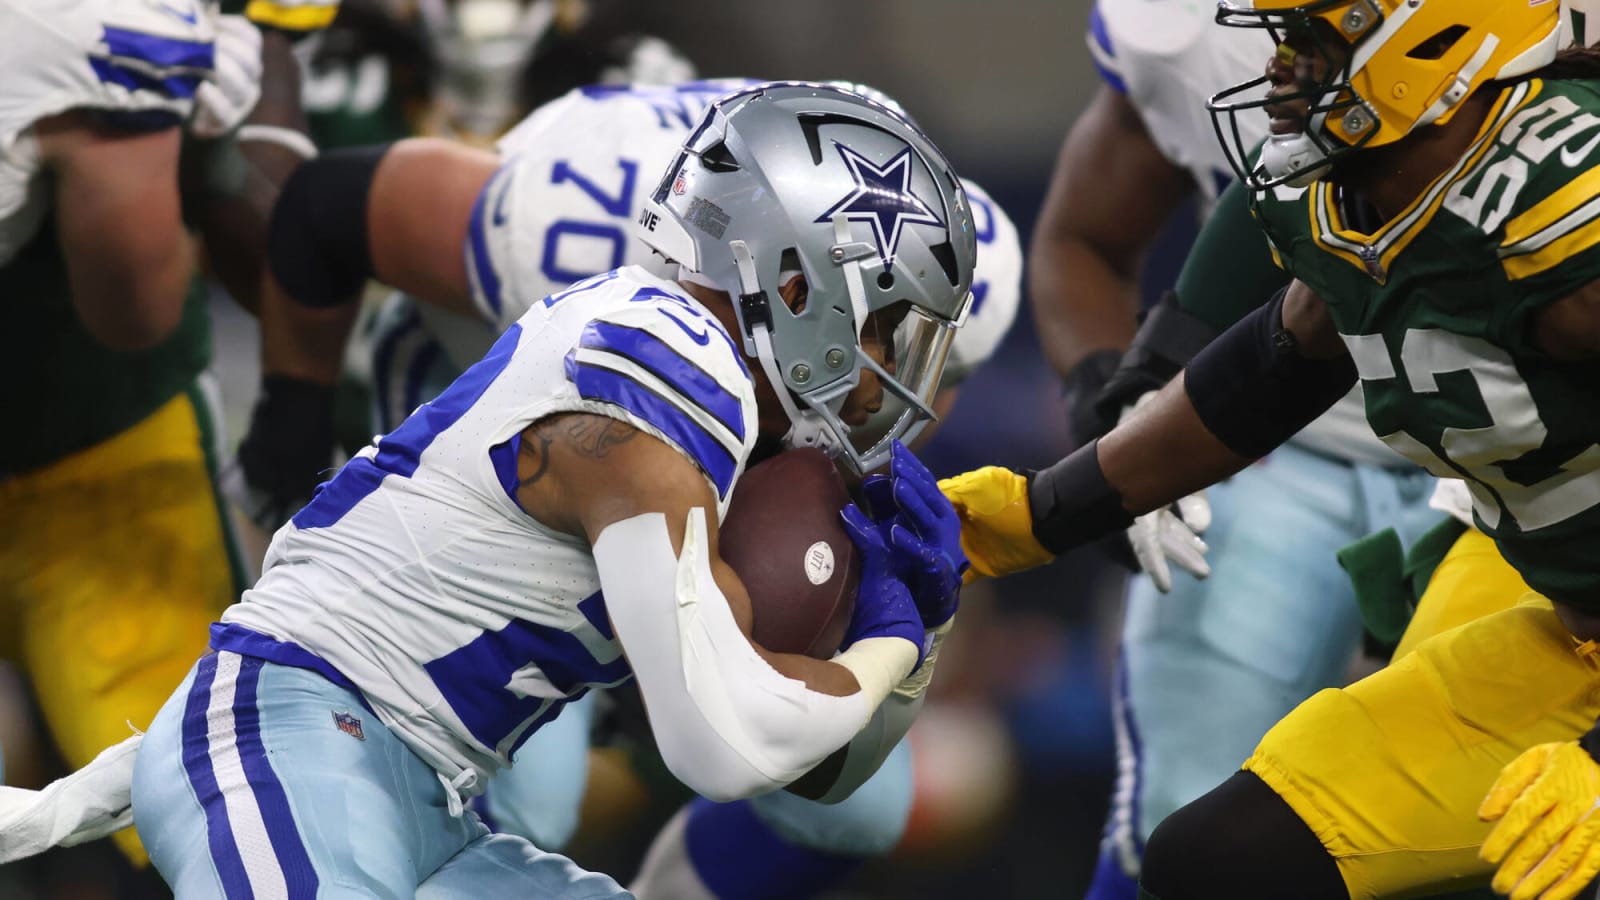 Cowboys lose 3 starters, defy 'all-in' declaration to start free agency